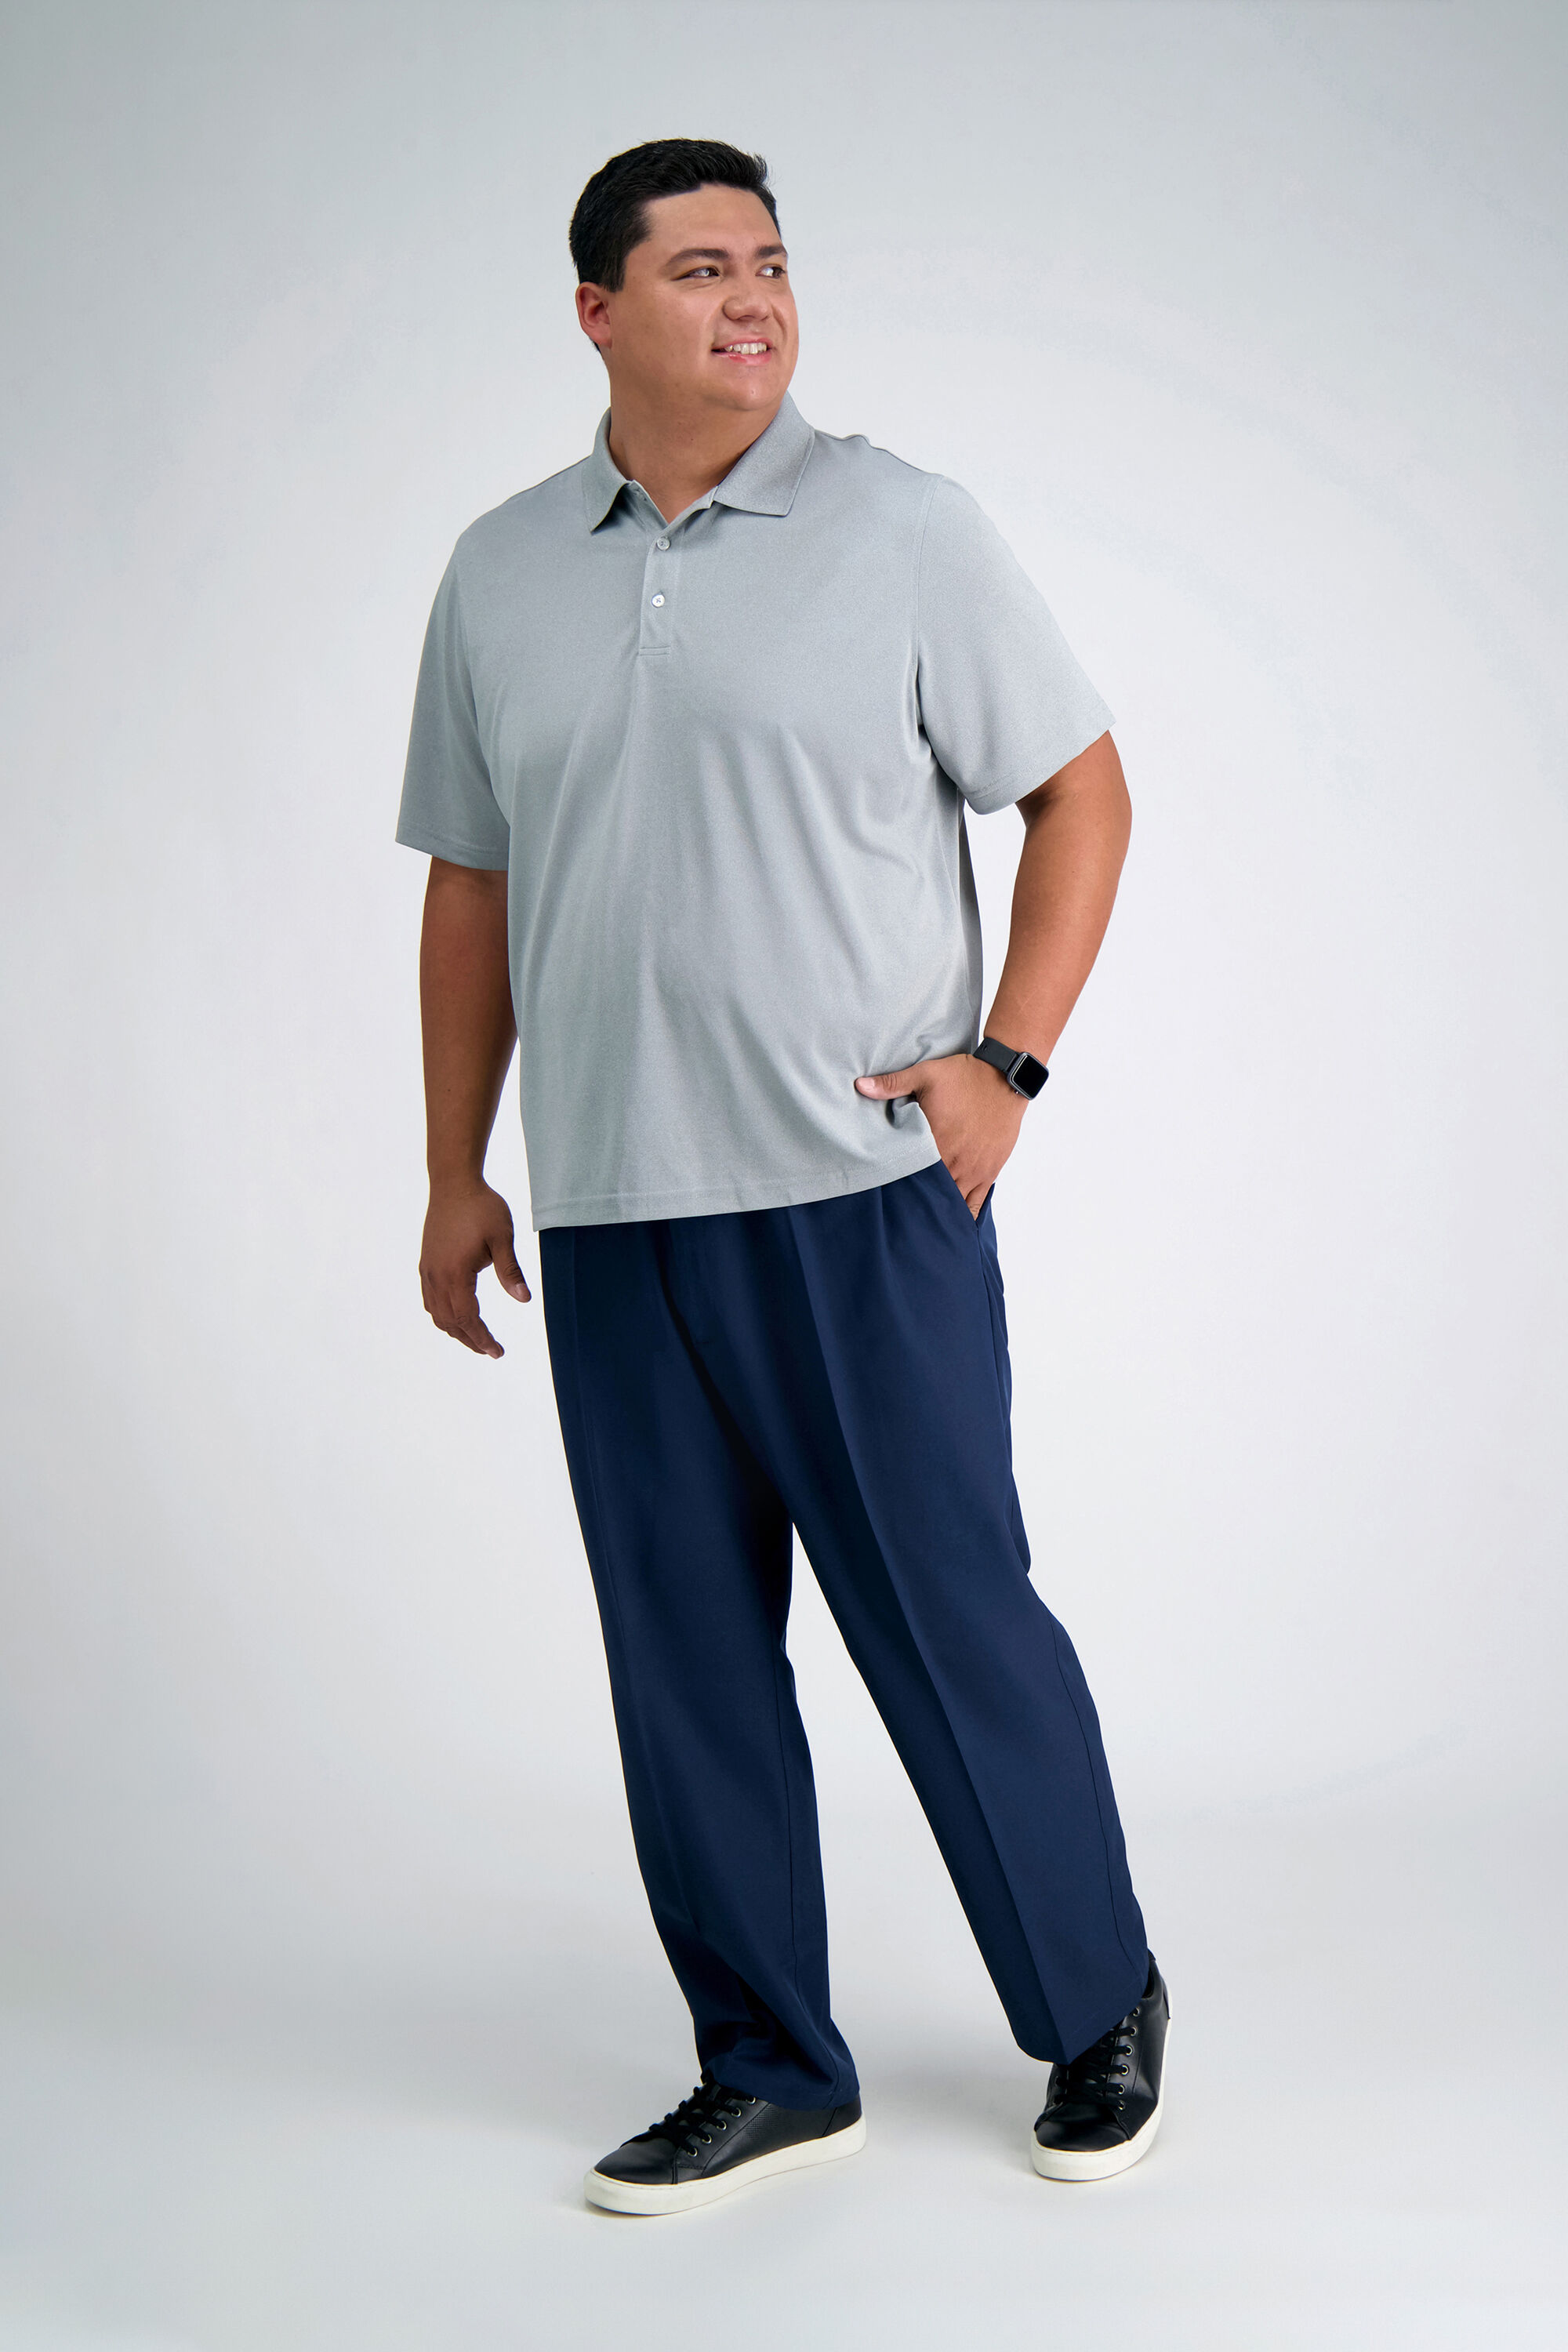 B&T Cool 18 Pro Pant | Classic Fit, Flat Front, Stretch, No Iron